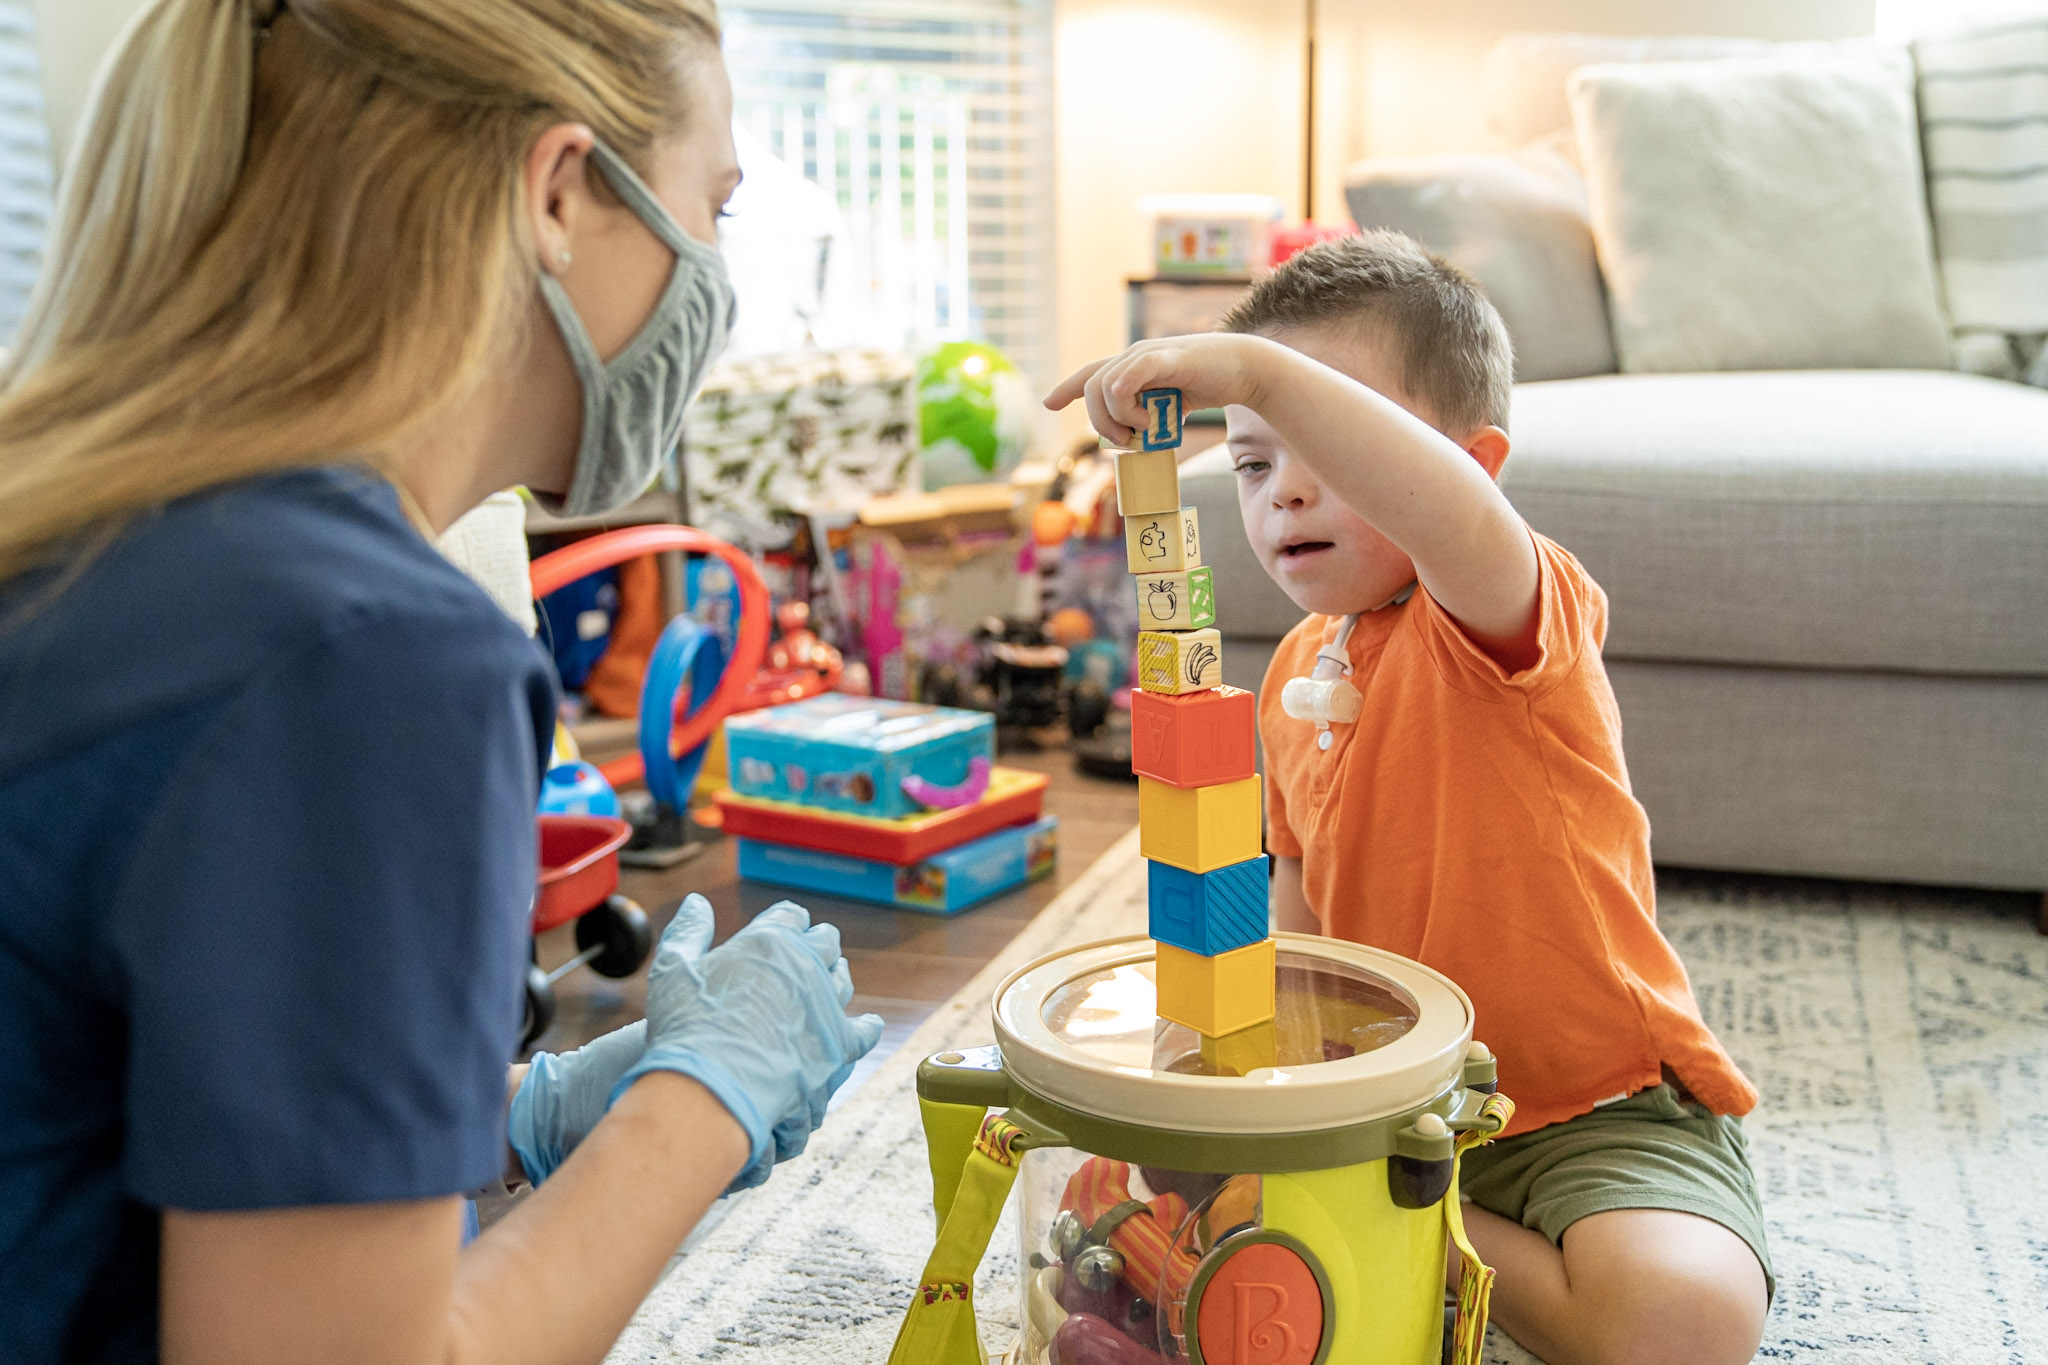 Little boy with special needs plays blocks at home with his occupational therapist.